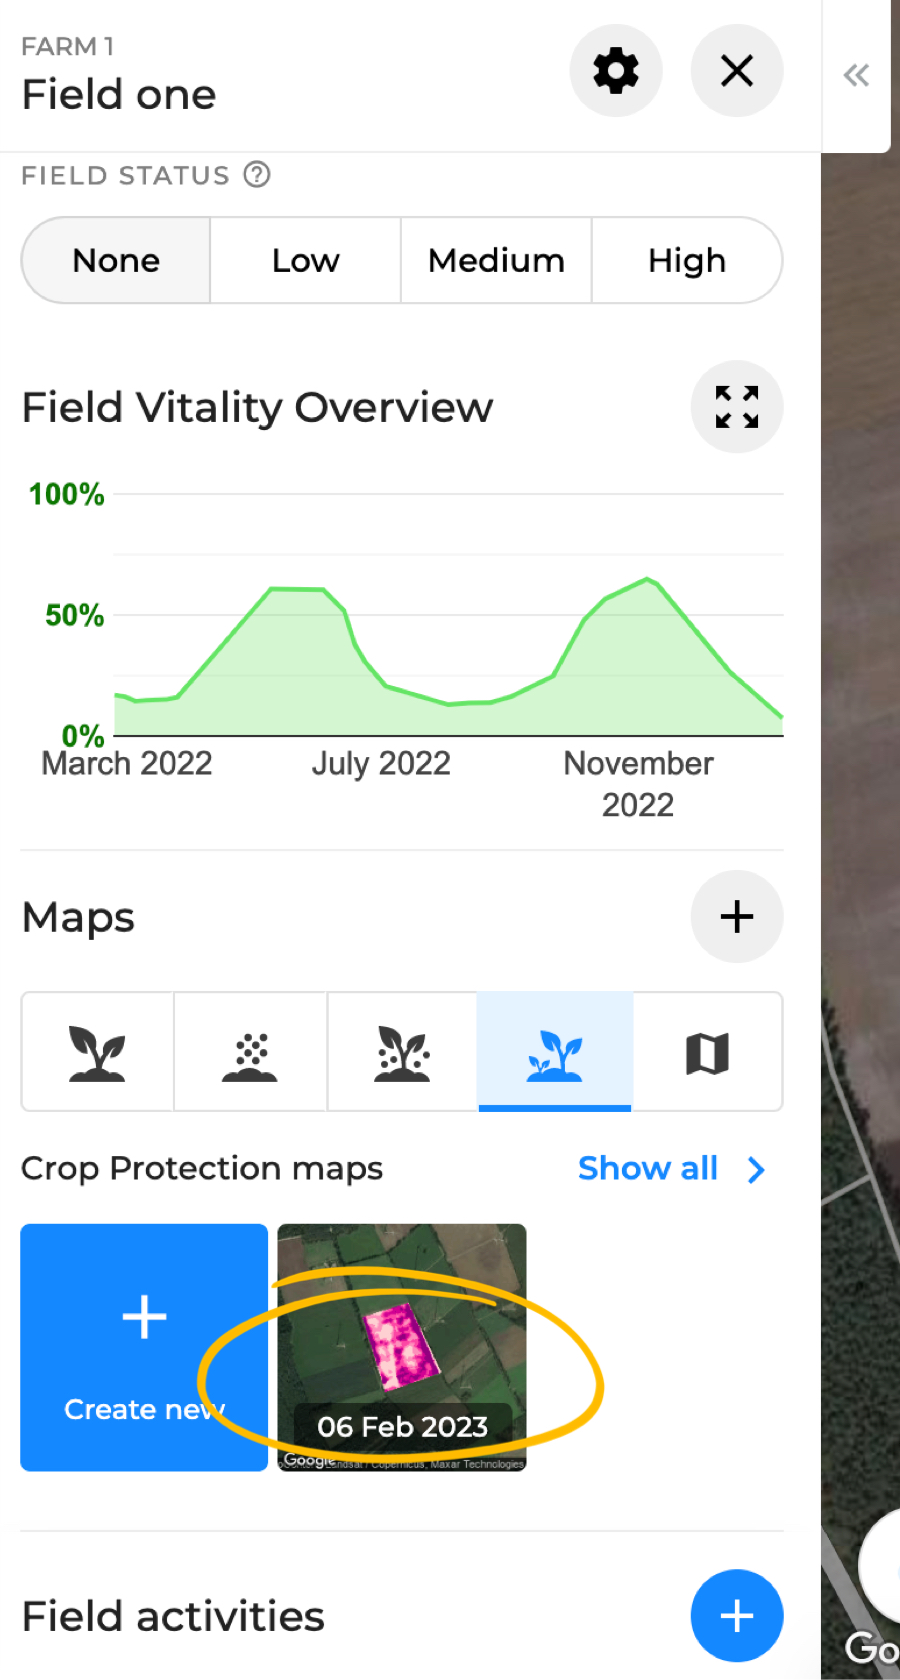 Copy-strategy-crop-protection-maps_12.jpg